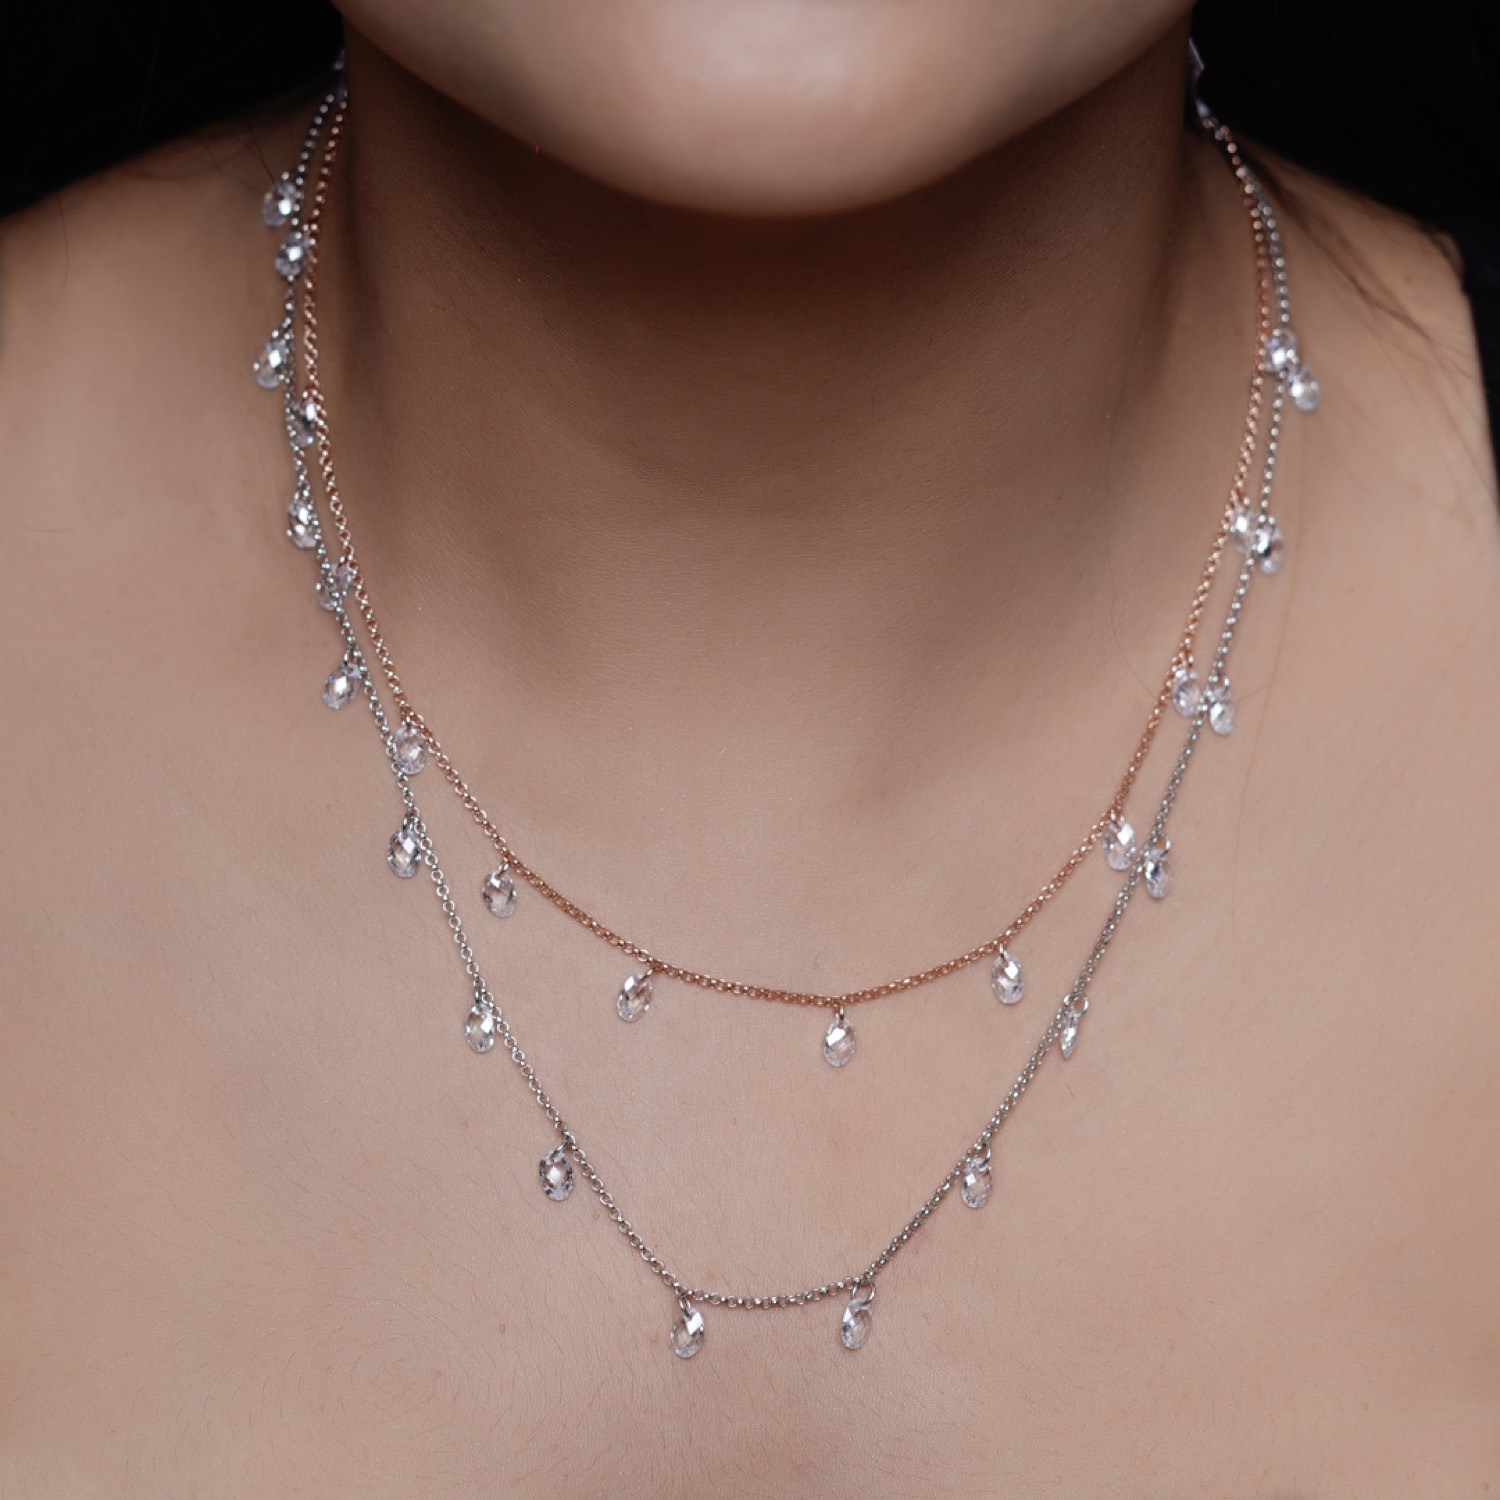 varam_chain_102022_silver_and_rose_gold_dual_layered_dangling_silver_chain-2